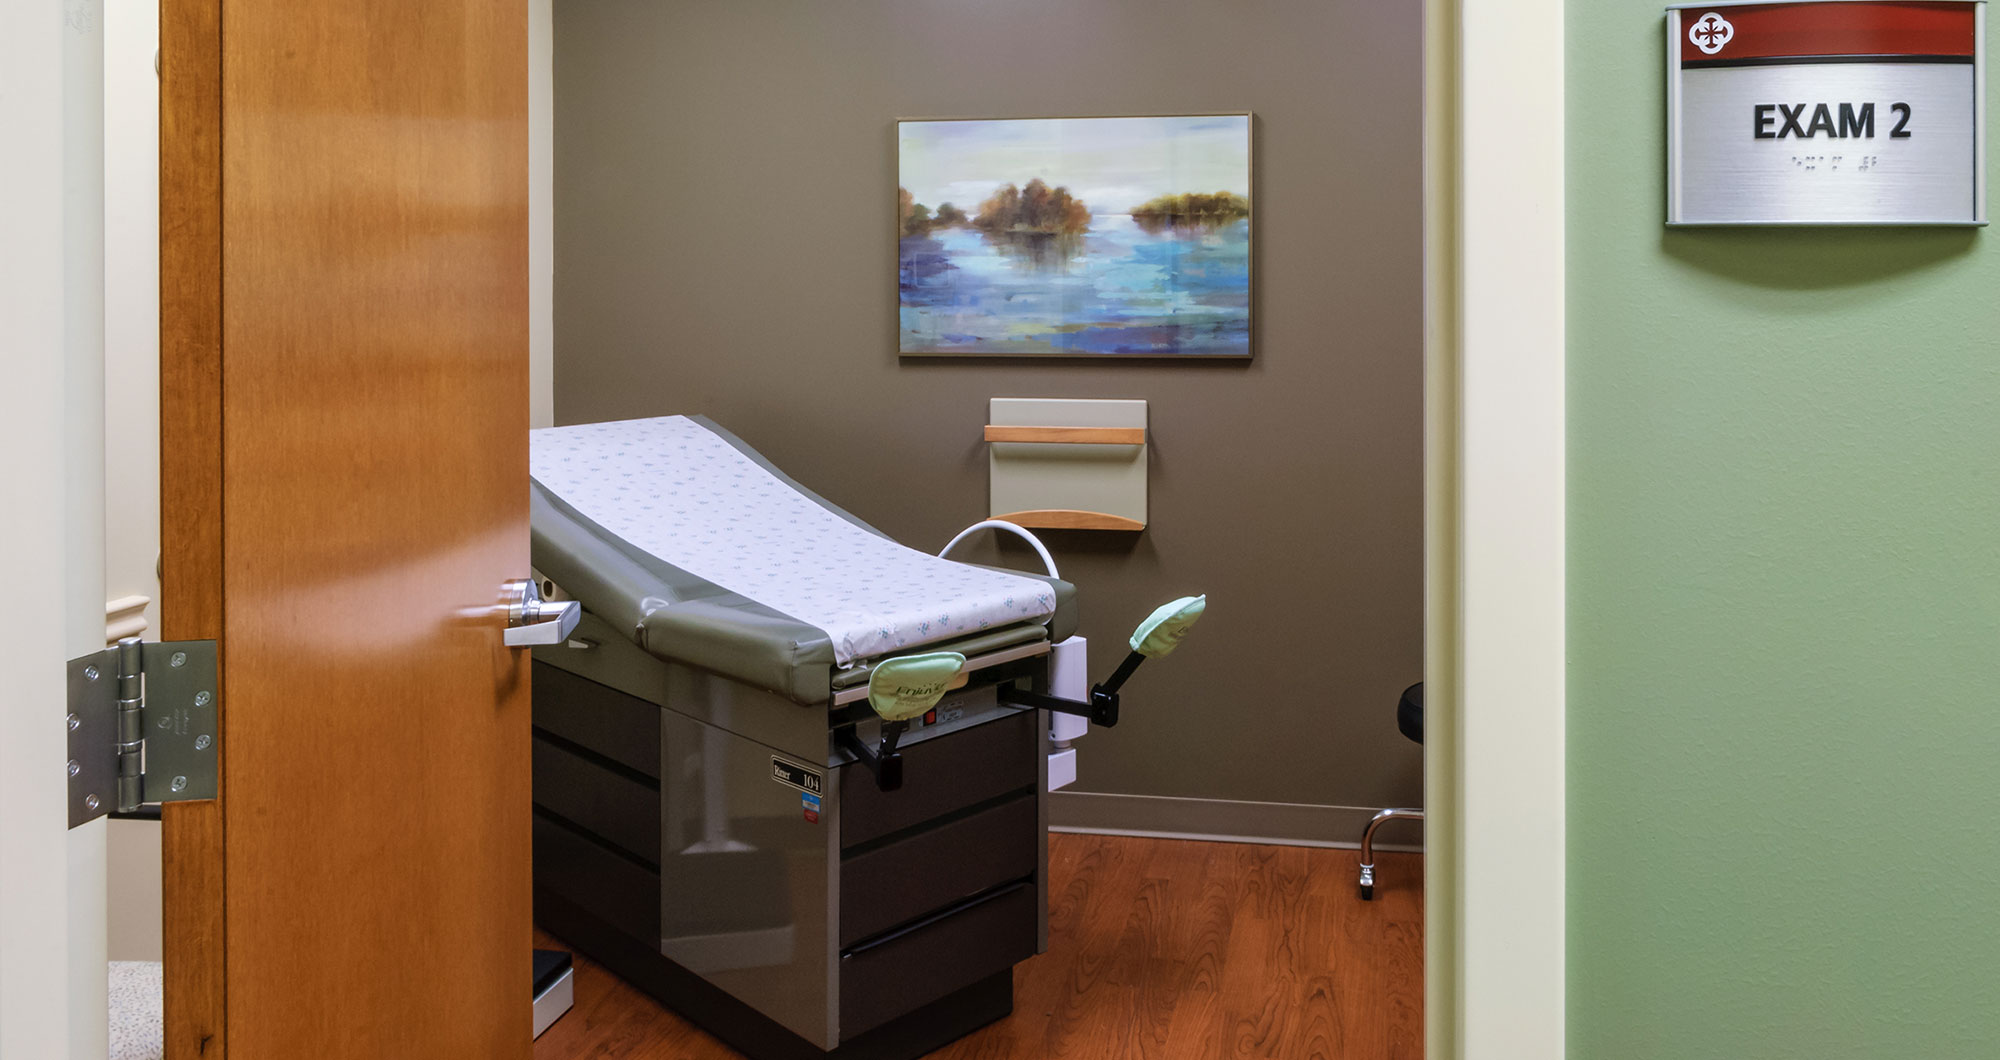 Saint Alphonsus Medical Group - OB/GYN at Mulvaney Medical Office Buiding - Exam Room